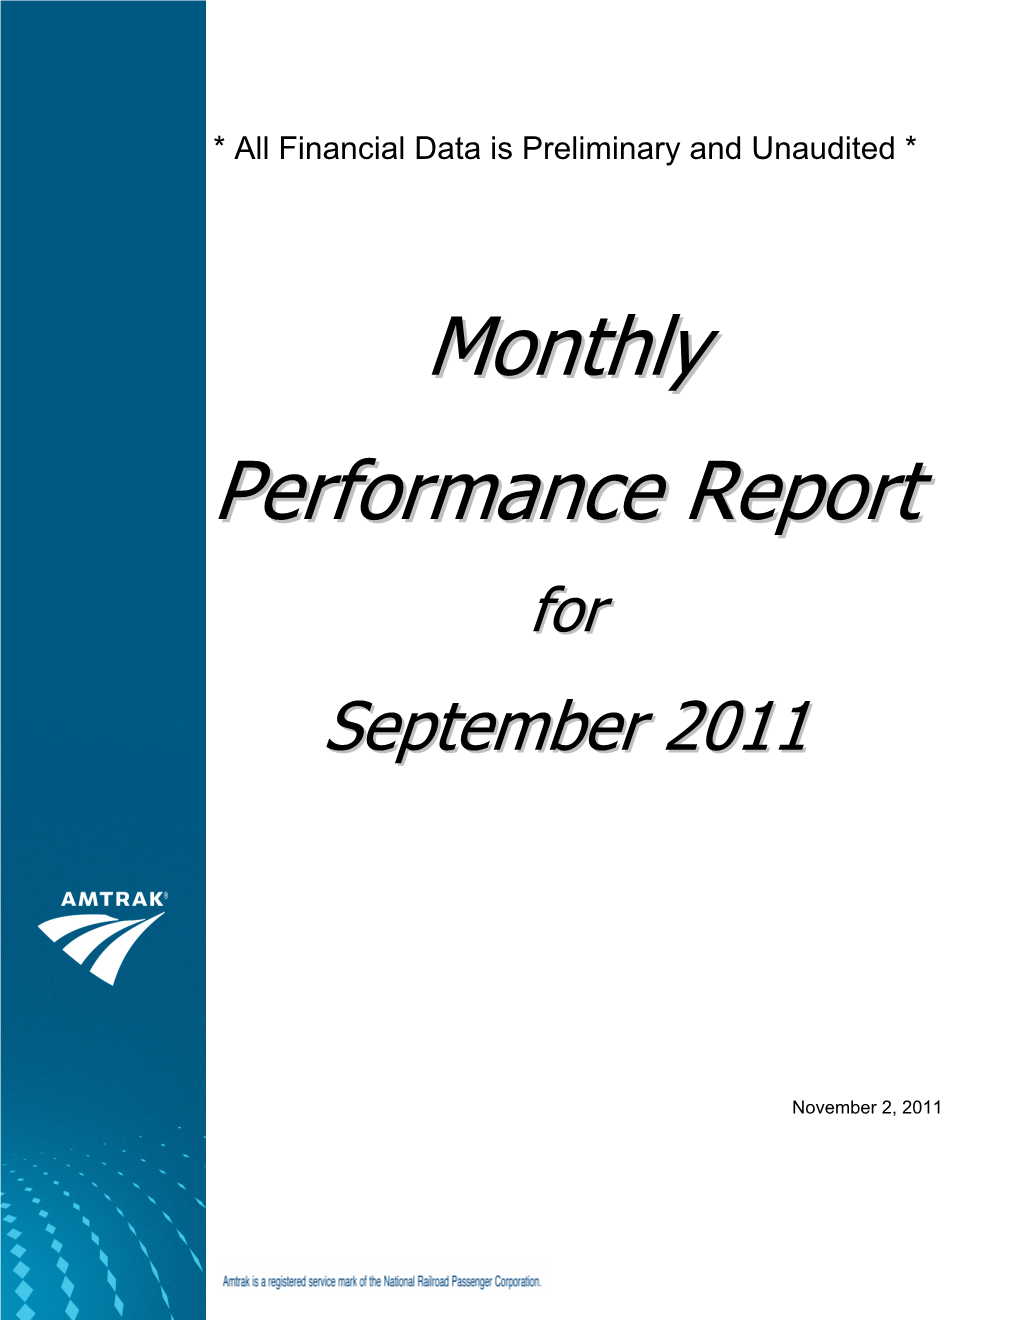 Monthly Performance Reports